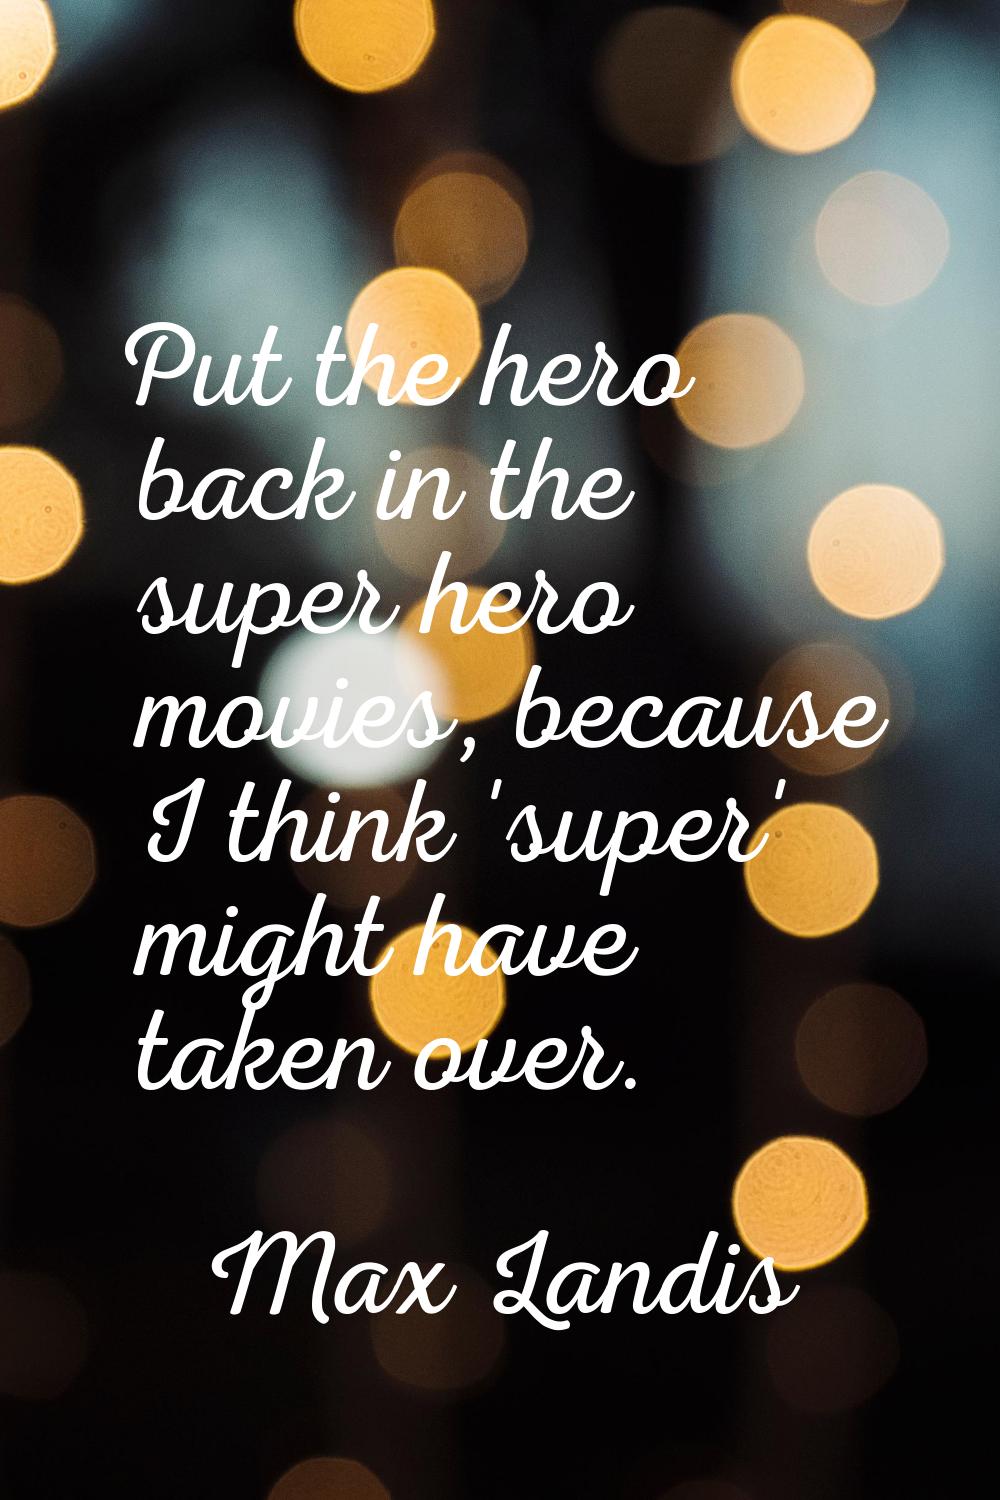 Put the hero back in the super hero movies, because I think 'super' might have taken over.